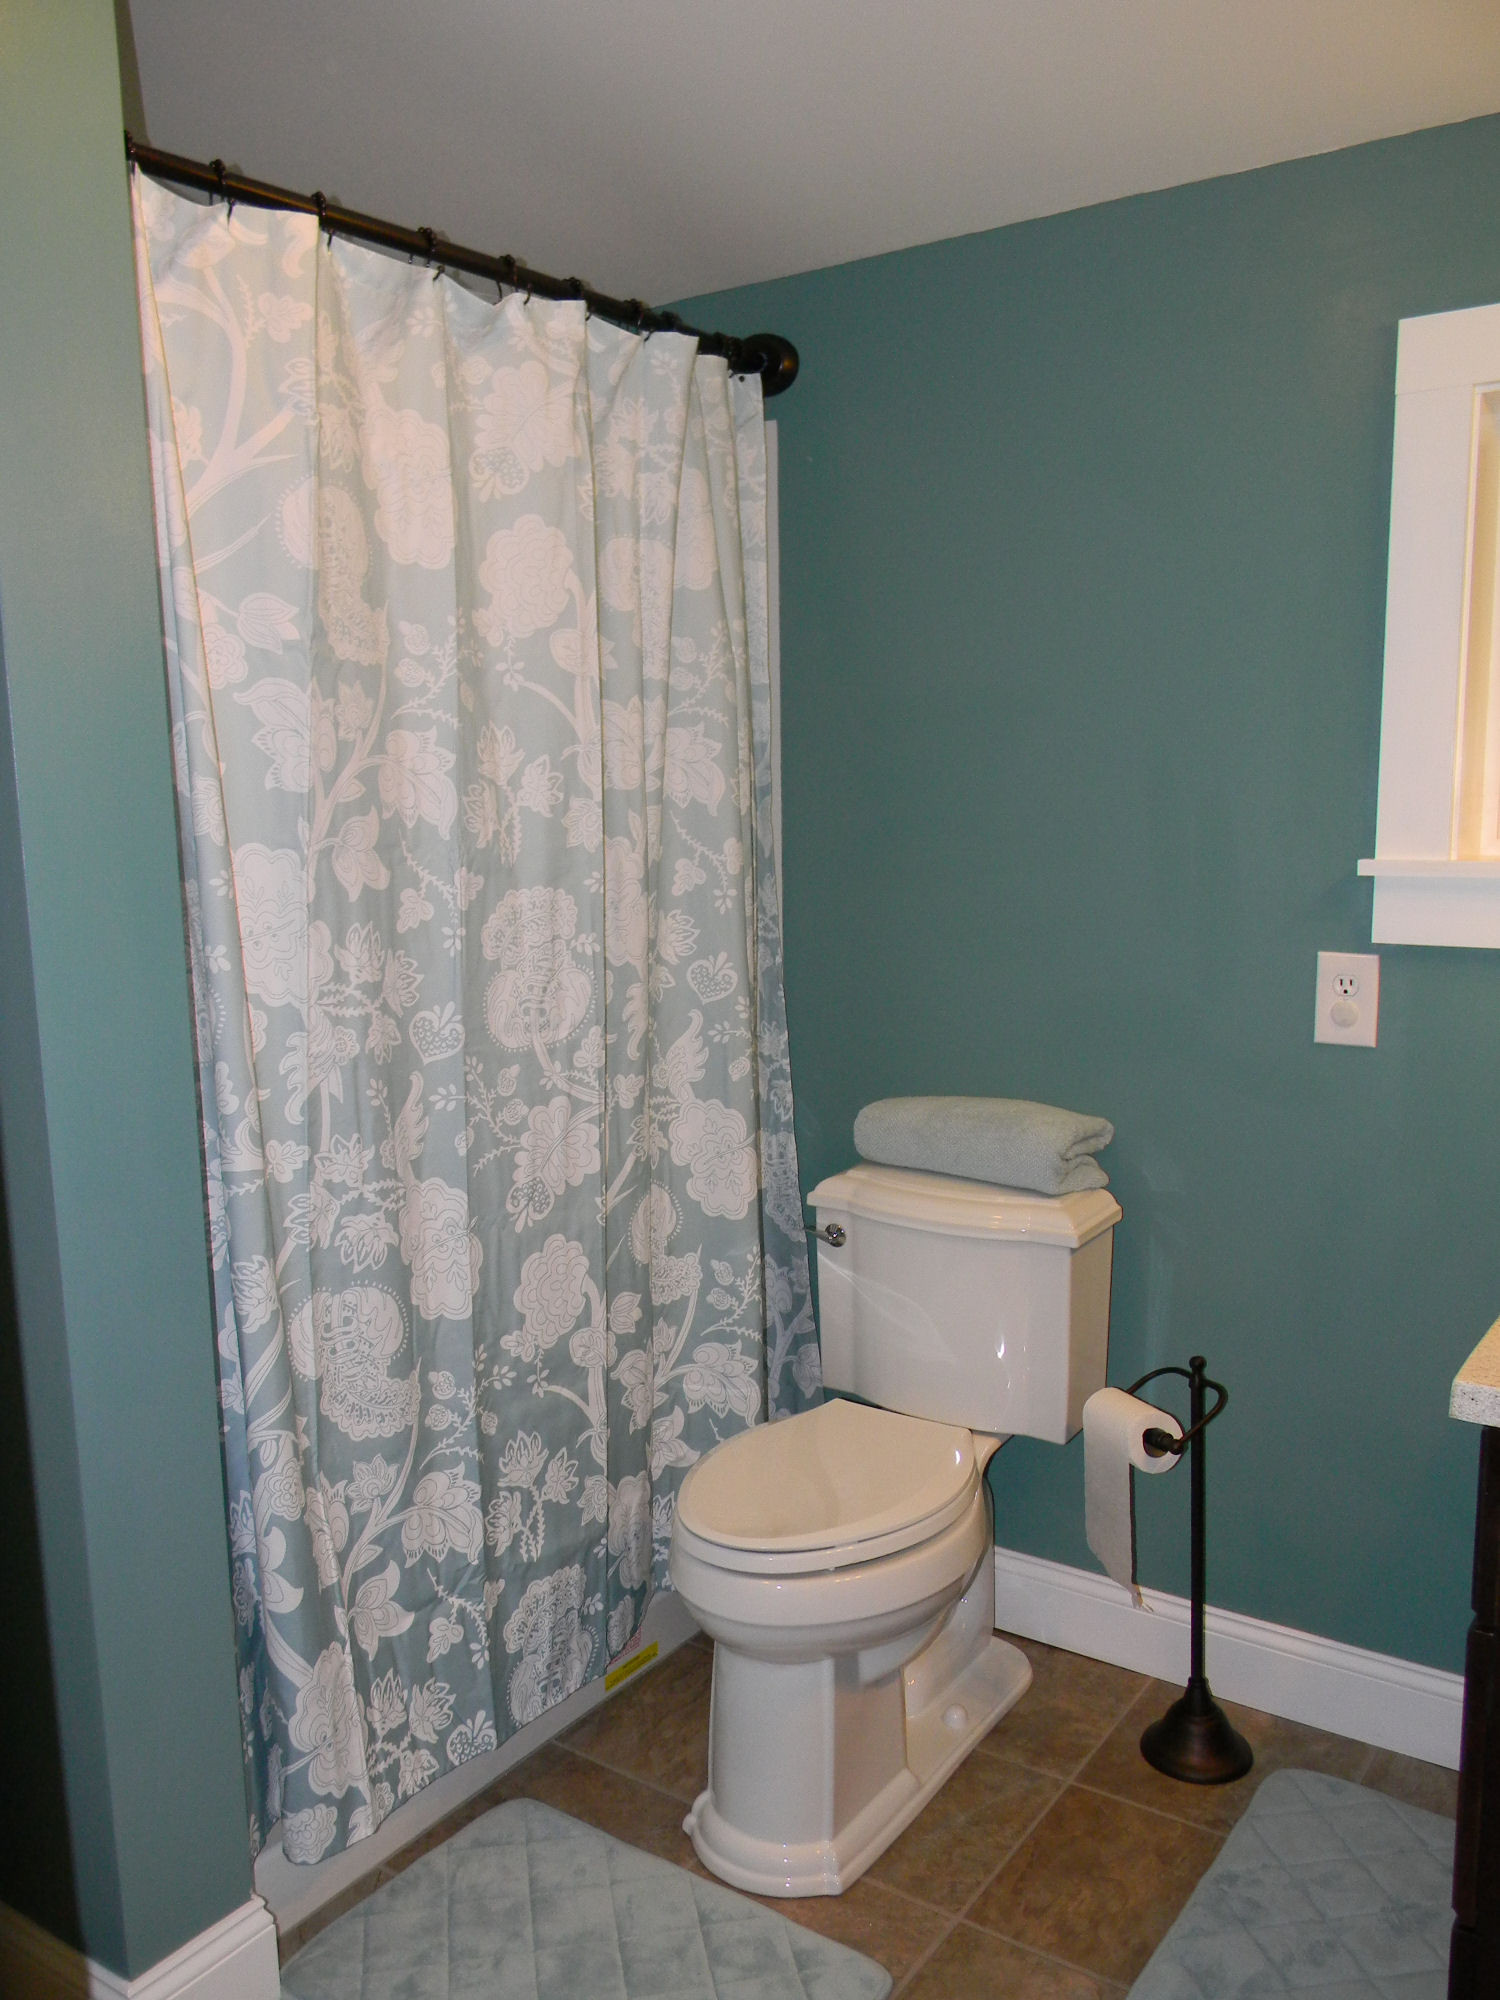 Mobile Home Bathroom Showers
 Giving The Throne The Royal Treatment Final Mobile Home